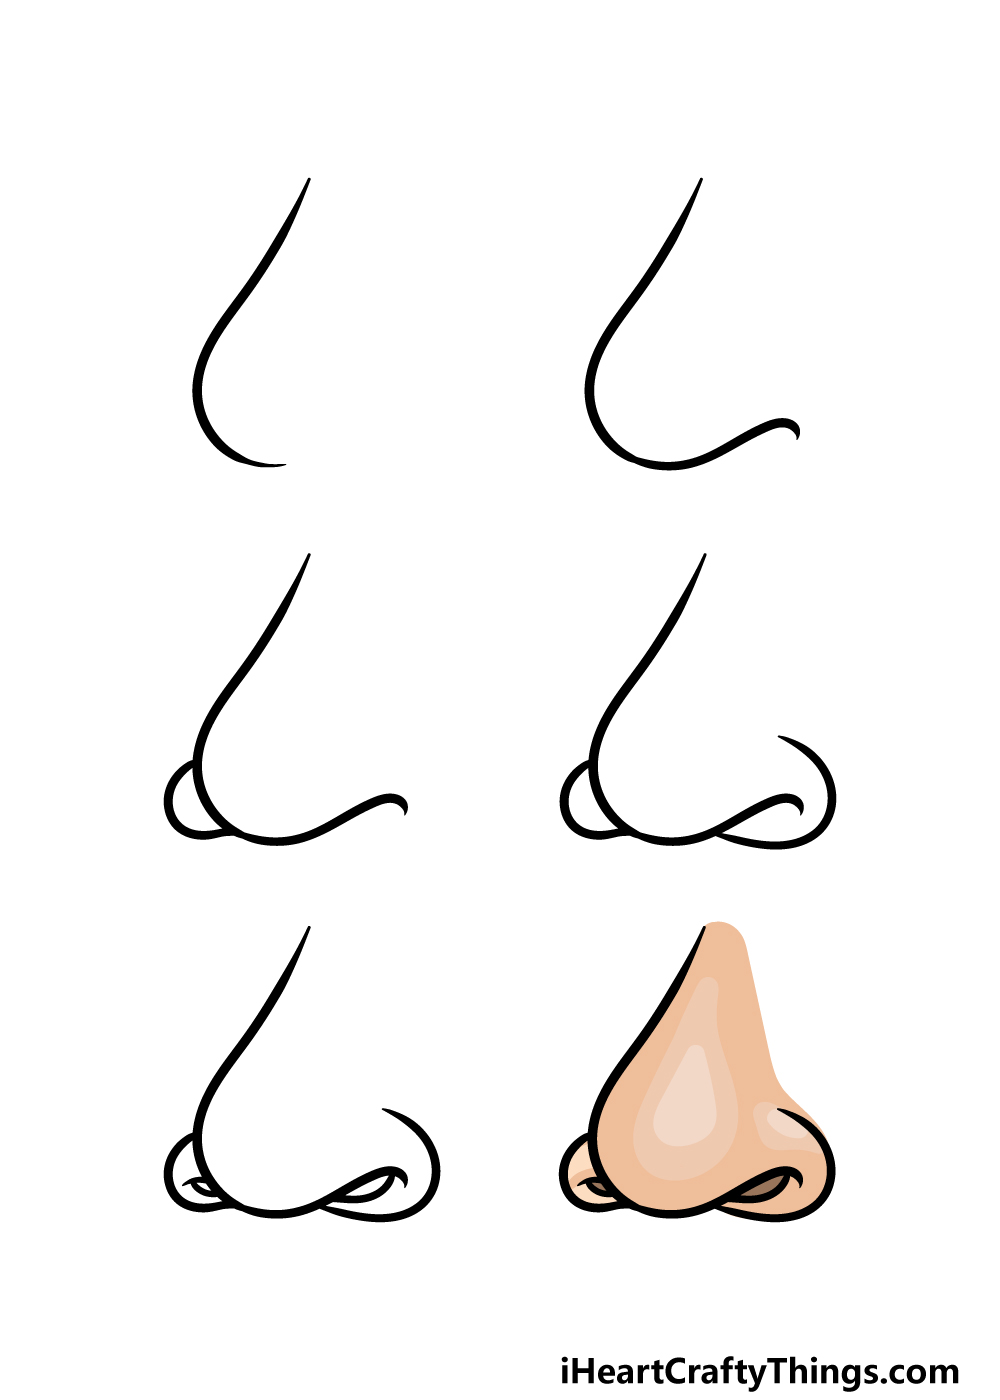 How to Draw a Nose : 9 Steps - Instructables